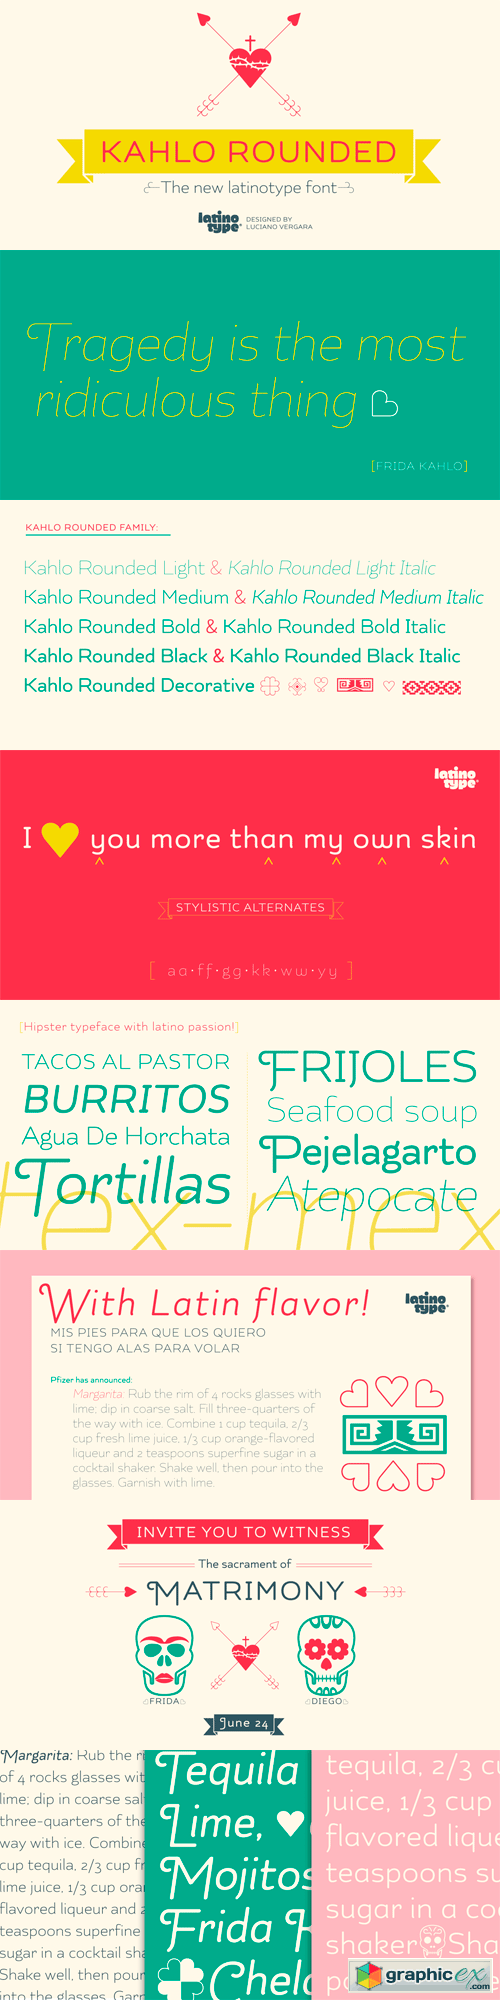 Kahlo Rounded Font Family - 25 Fonts for $195